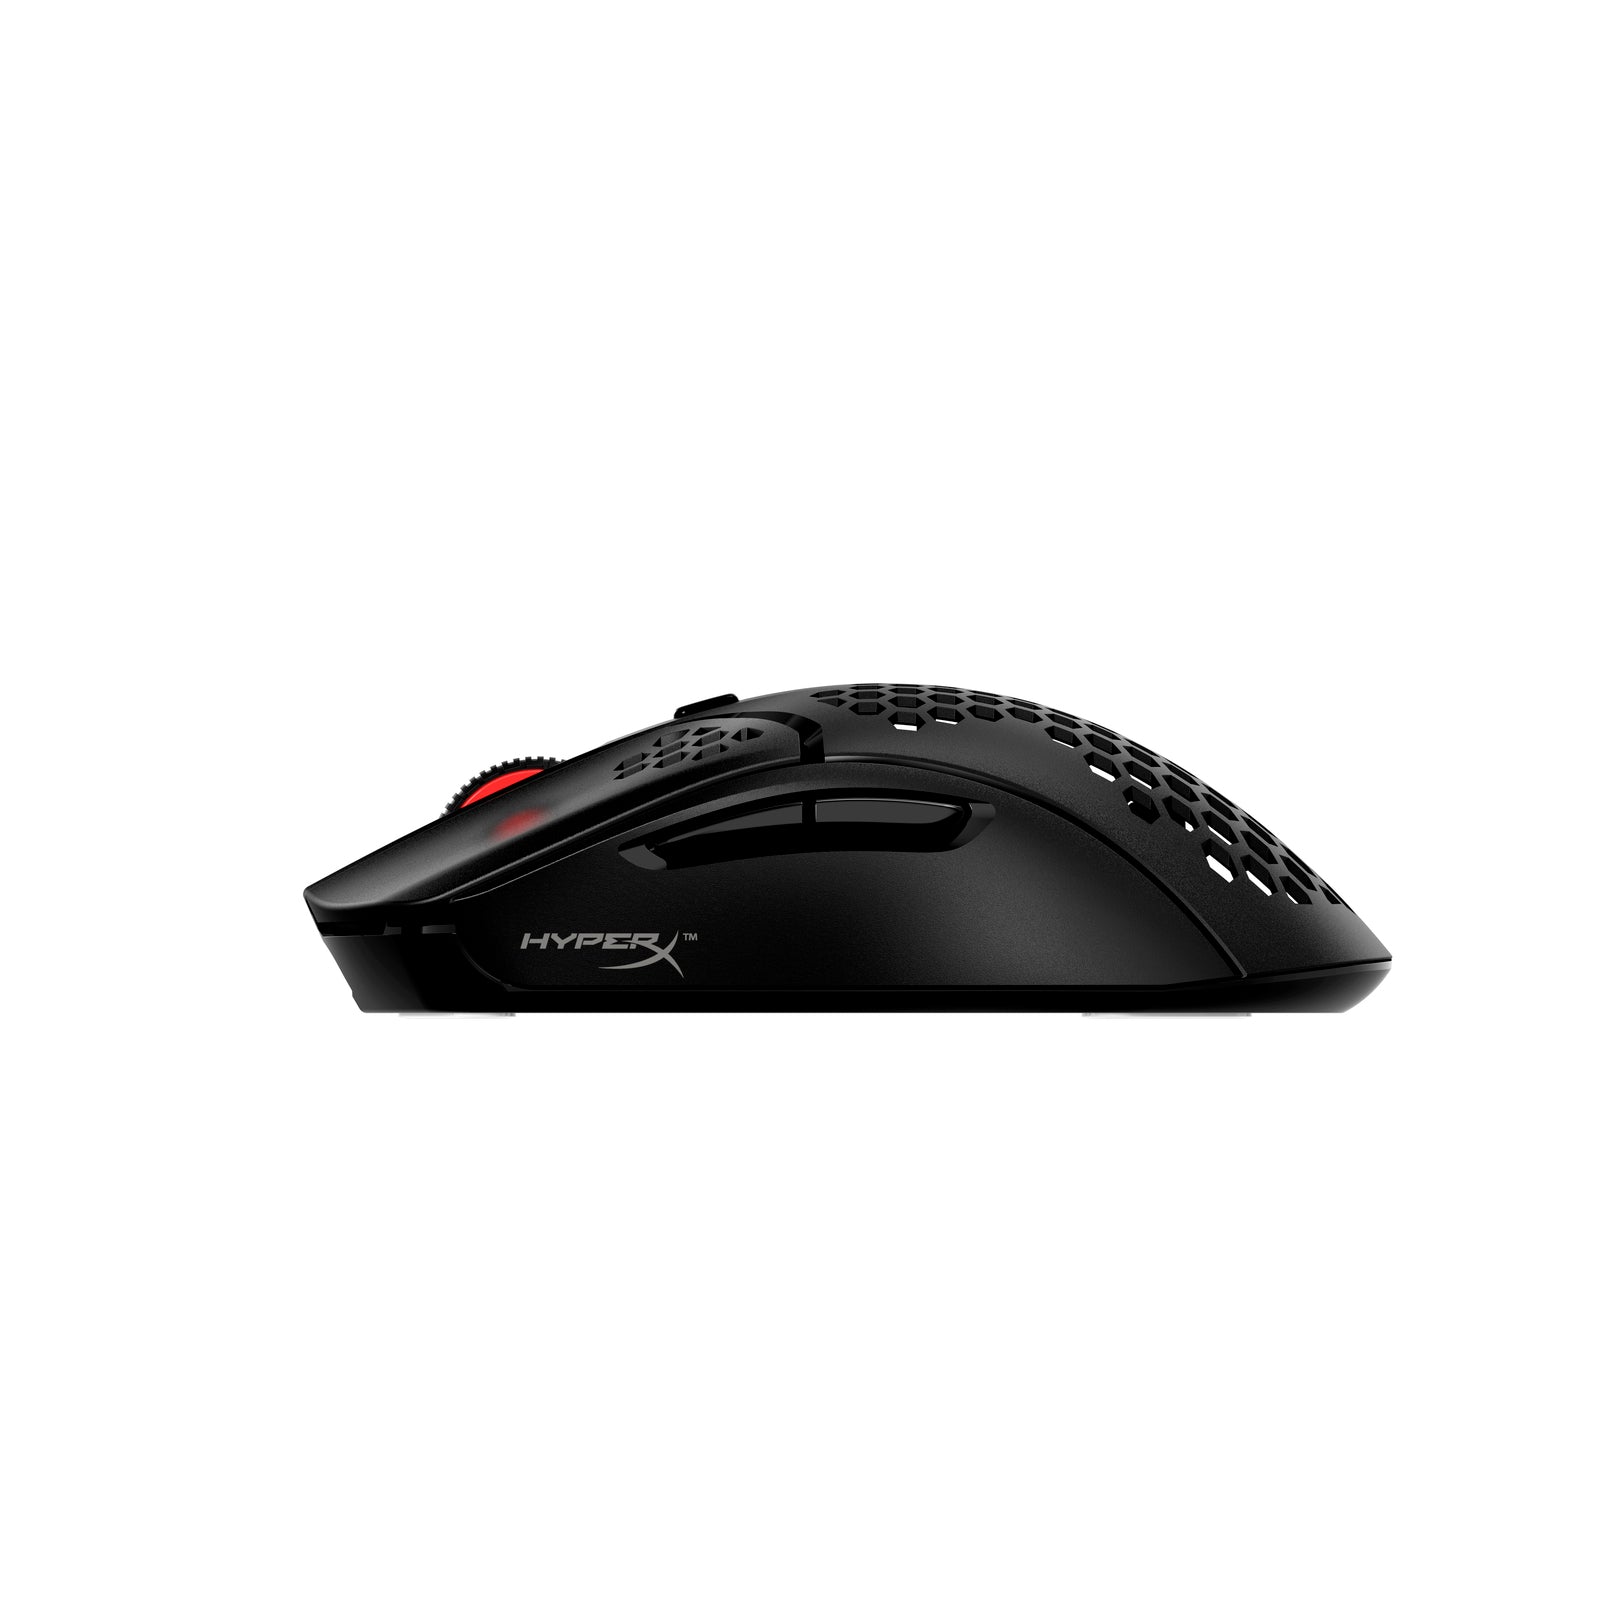 Left facing view of HyperX Pulsefire Haste wireless gaming mouse displaying programmable buttons